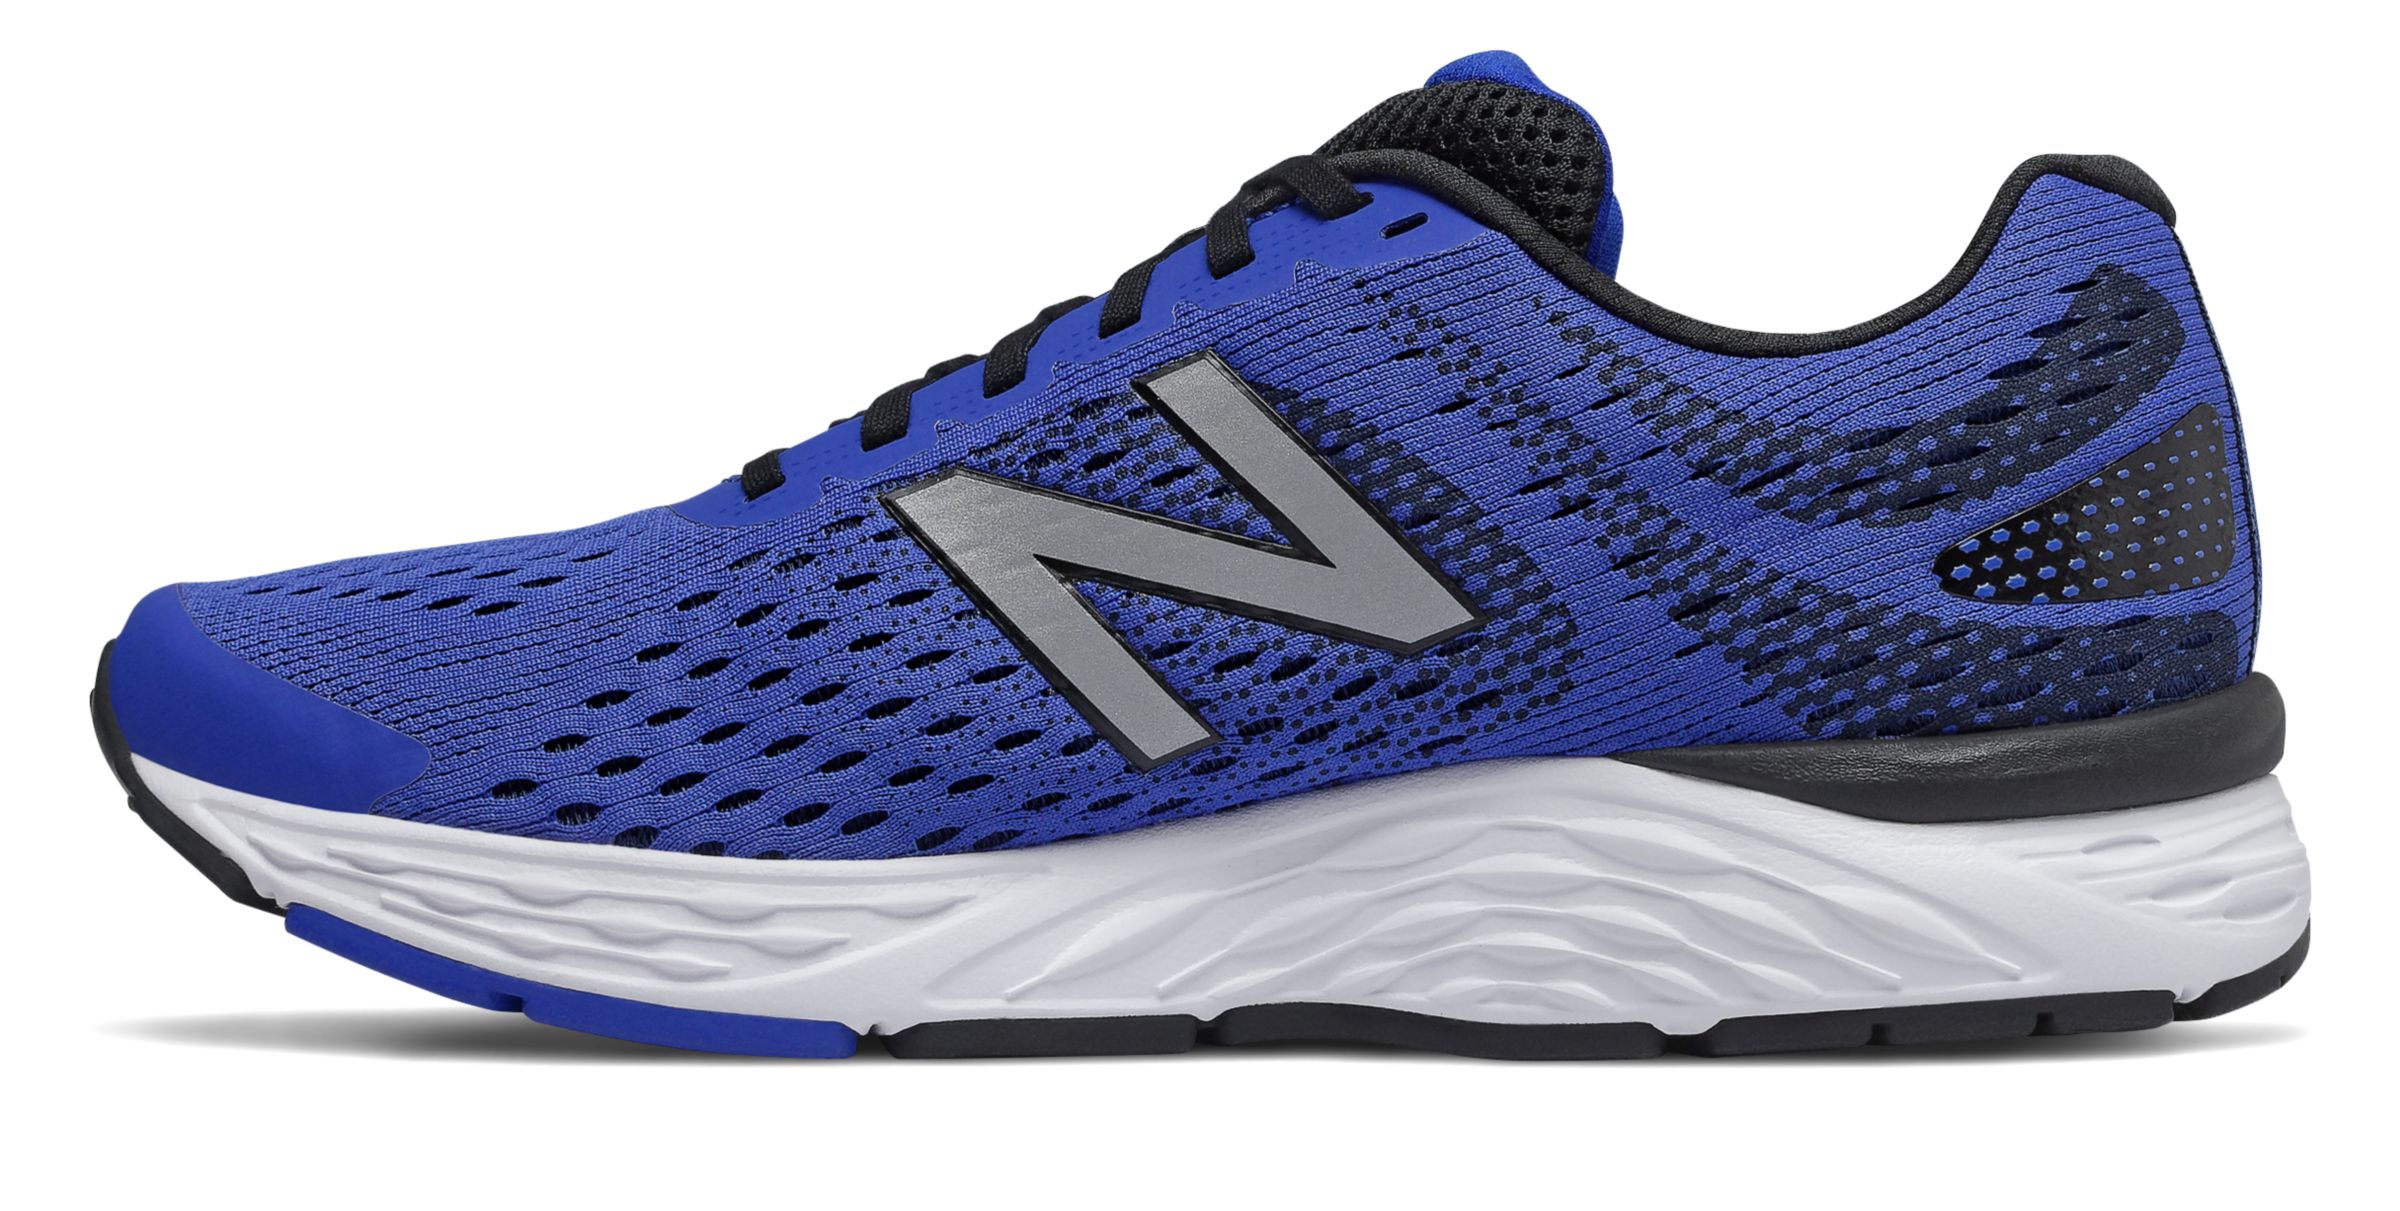 New Balance M680-V6 on Sale - Discounts Up to 54% Off on M680LB6 at Joe's  New Balance Outlet